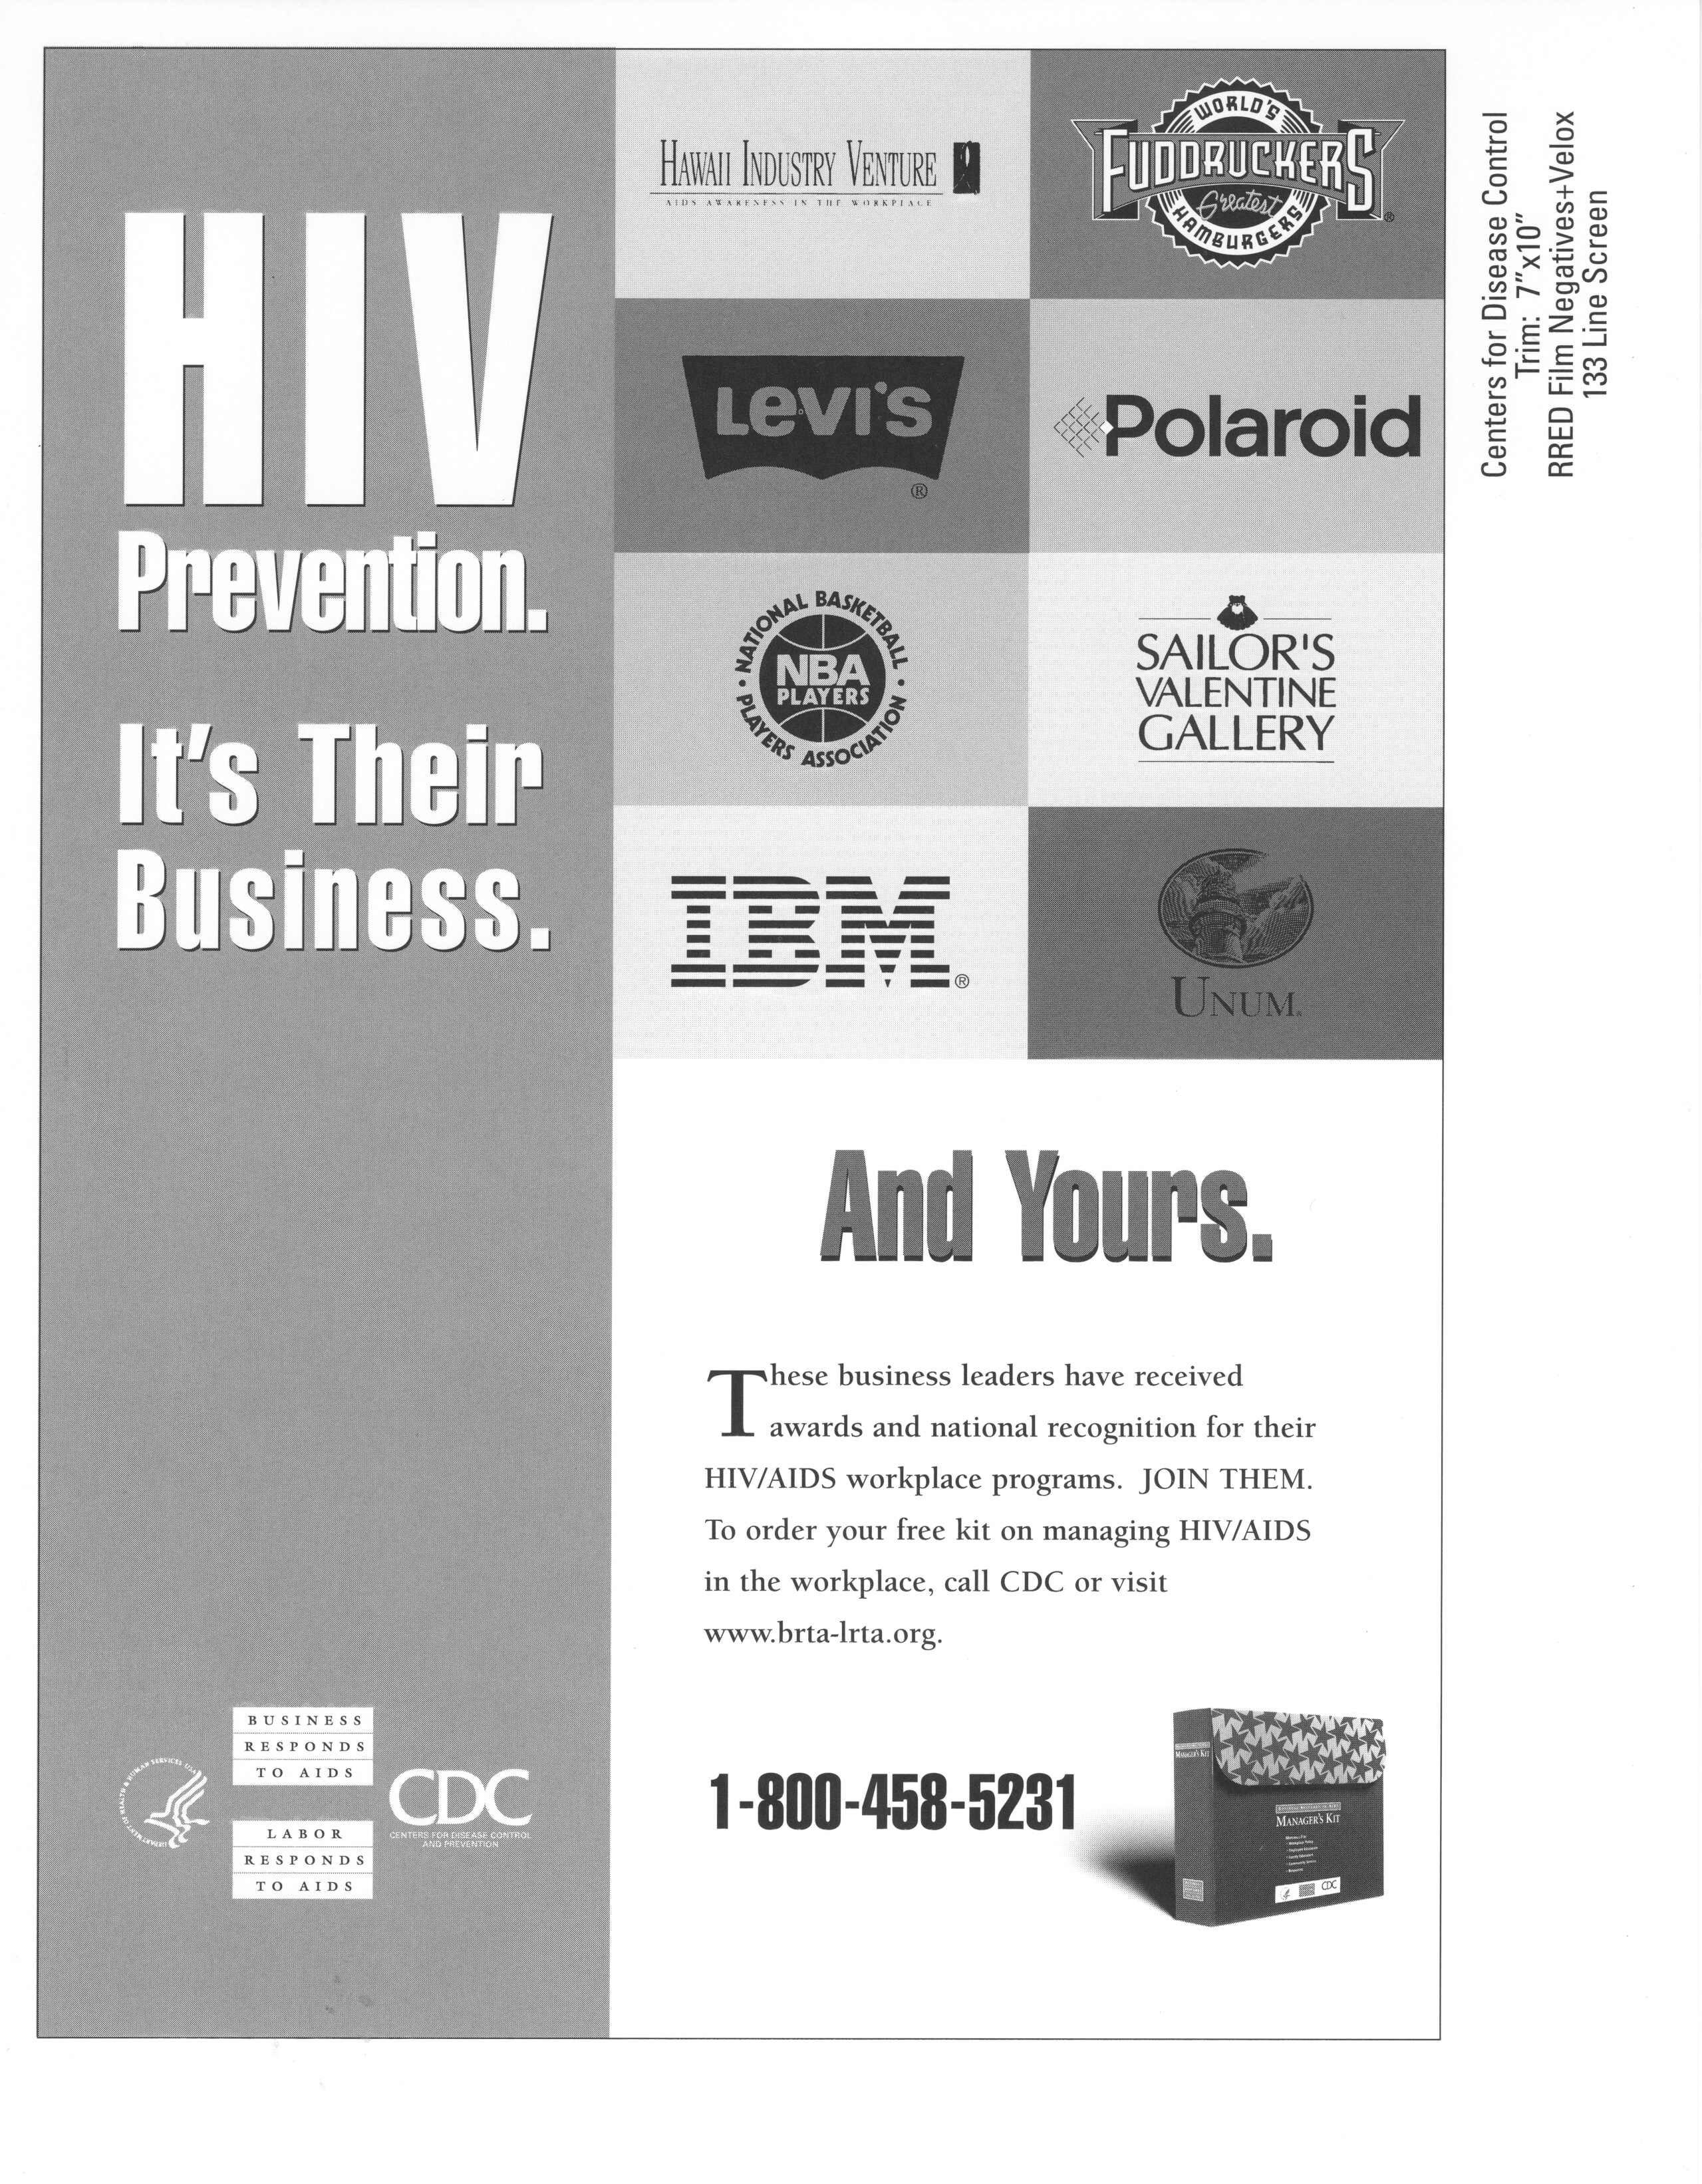 HIV prevention. it's their business. And yours.